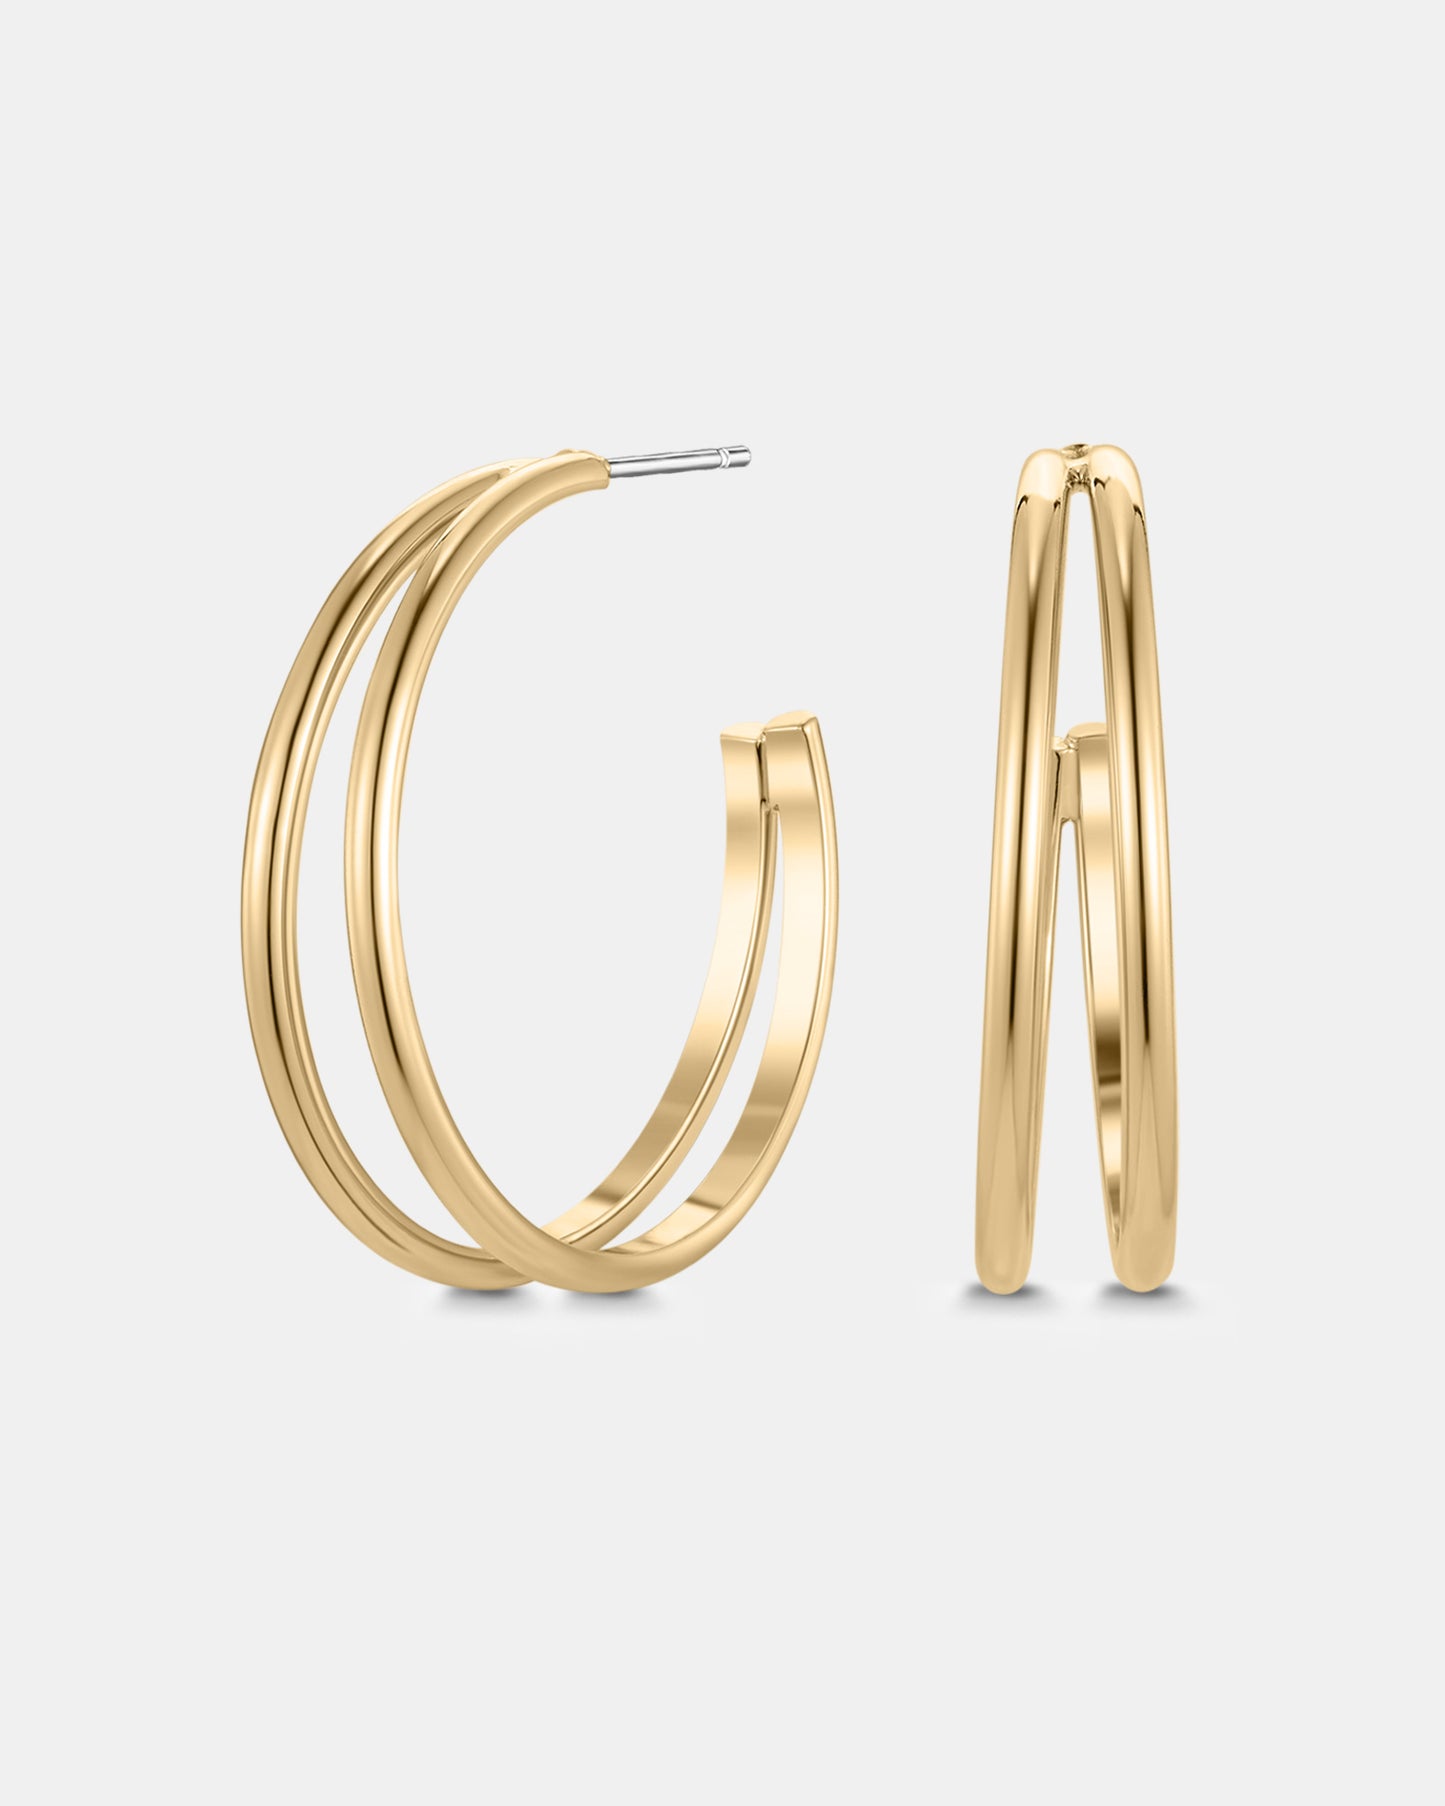 Architect 20mm Hoops